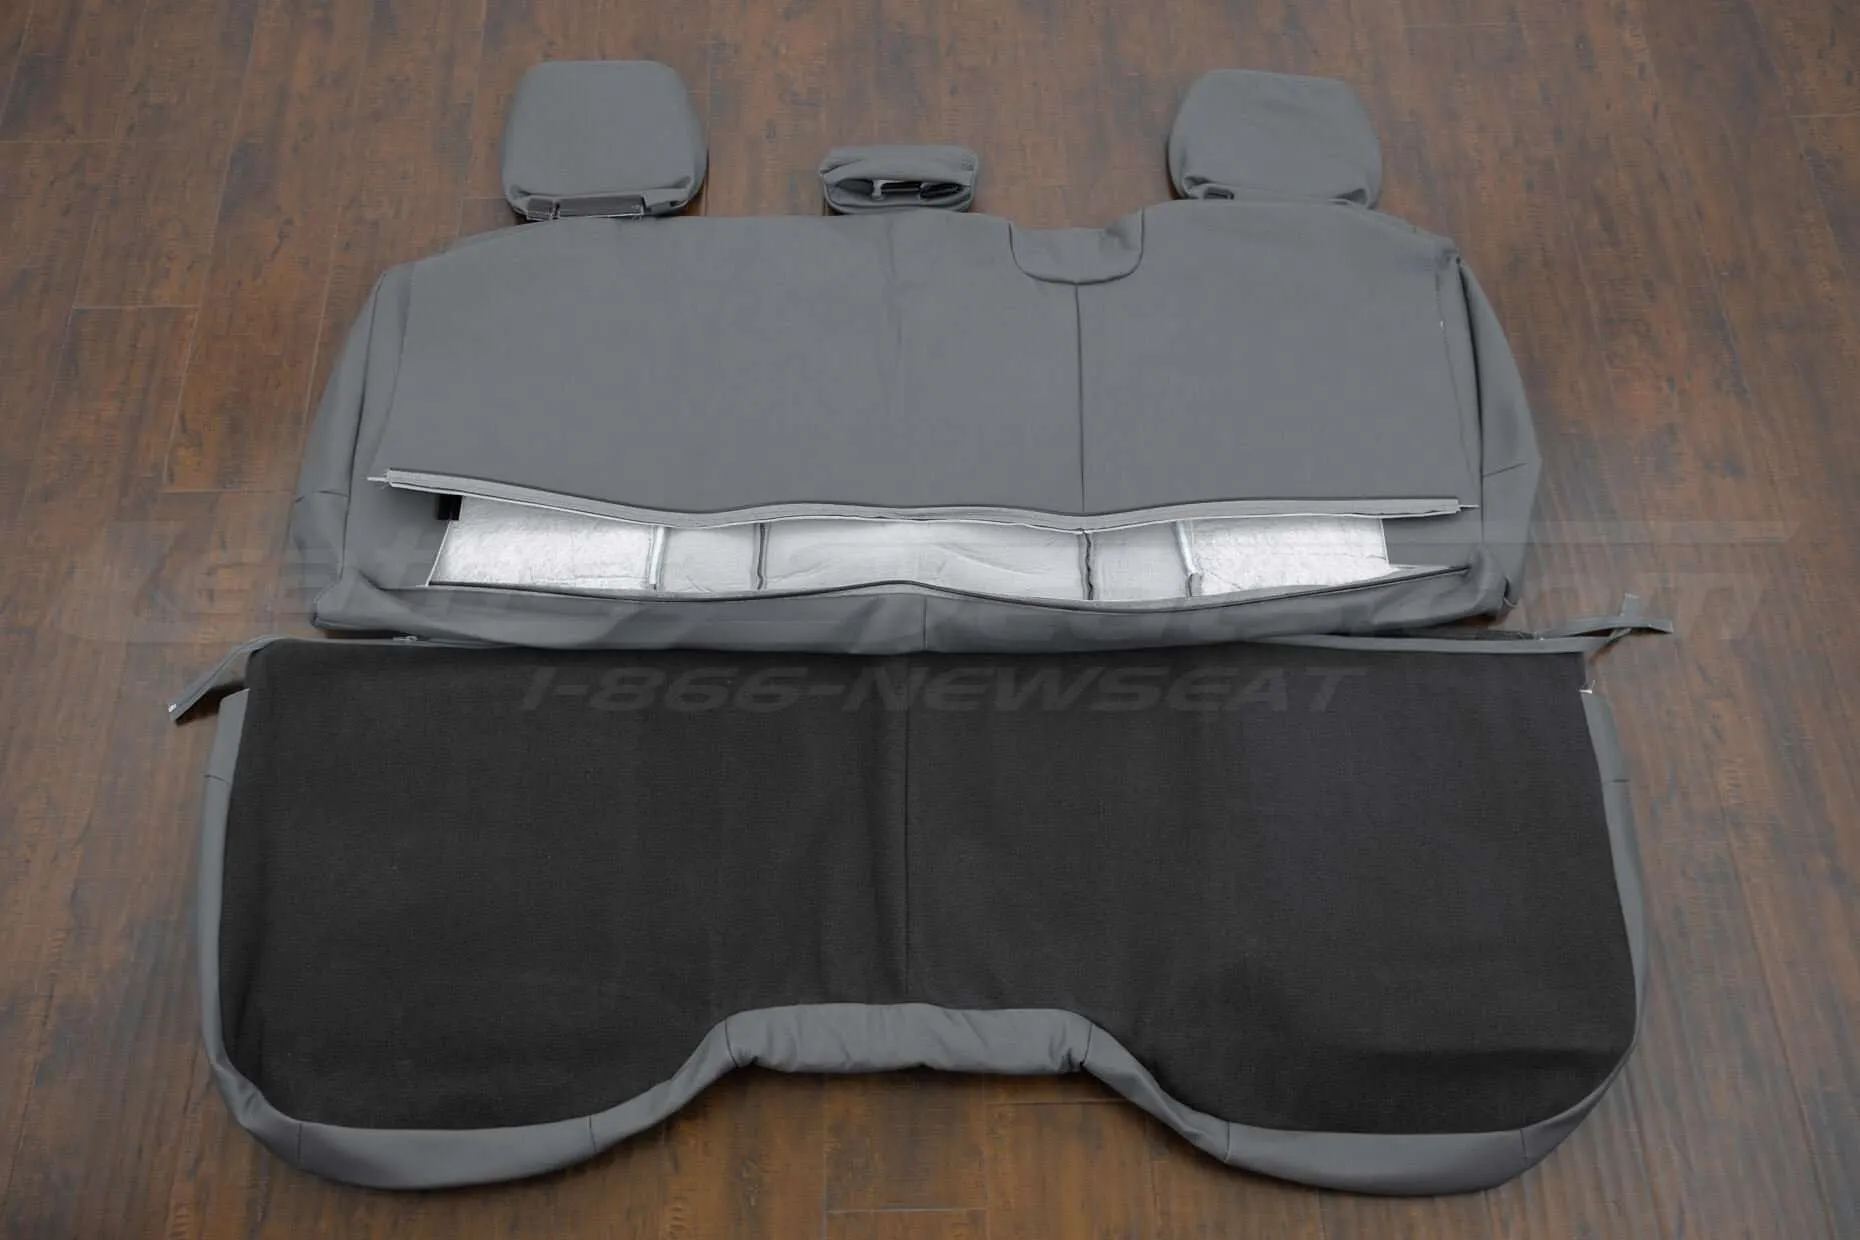 Back view of rear seat uphosltery